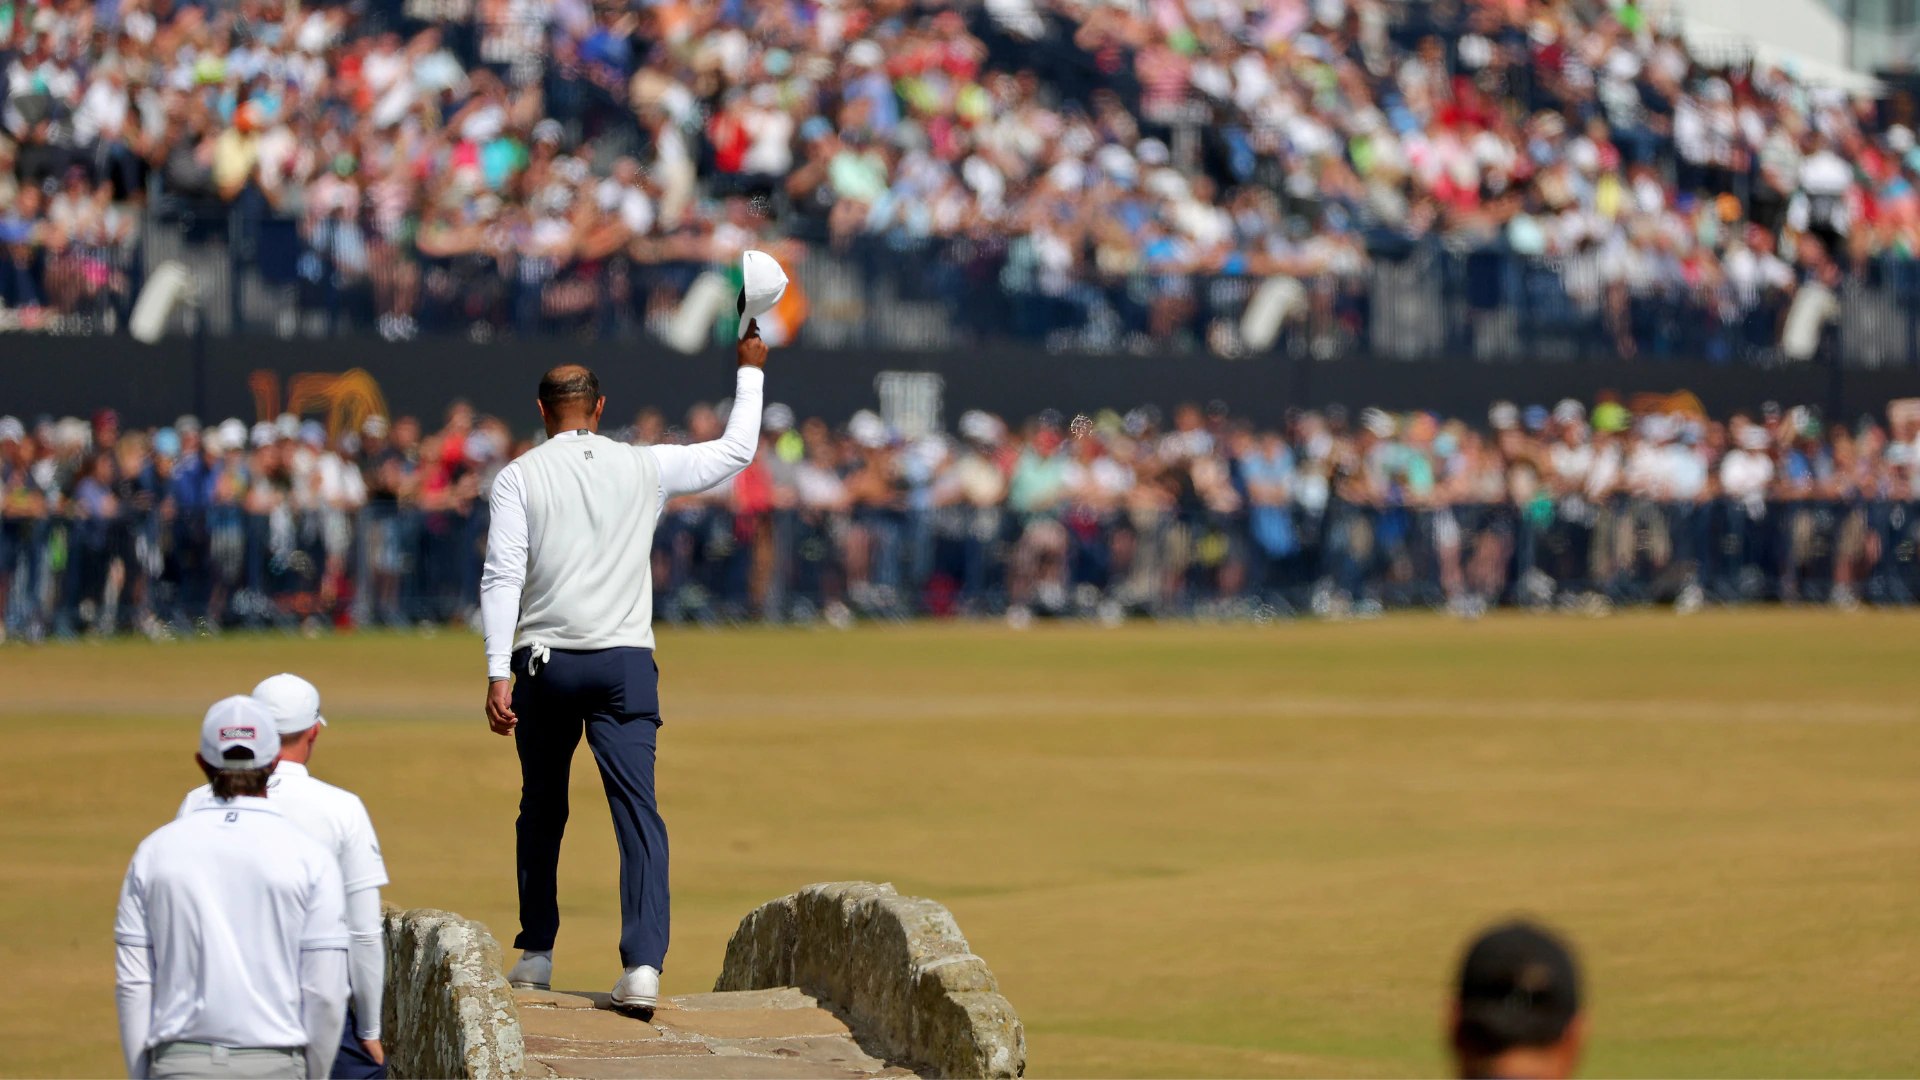 2022 British Open: With a hat tip, a few tears and lots of cheers, Tiger Woods may have said goodbye to Old Course